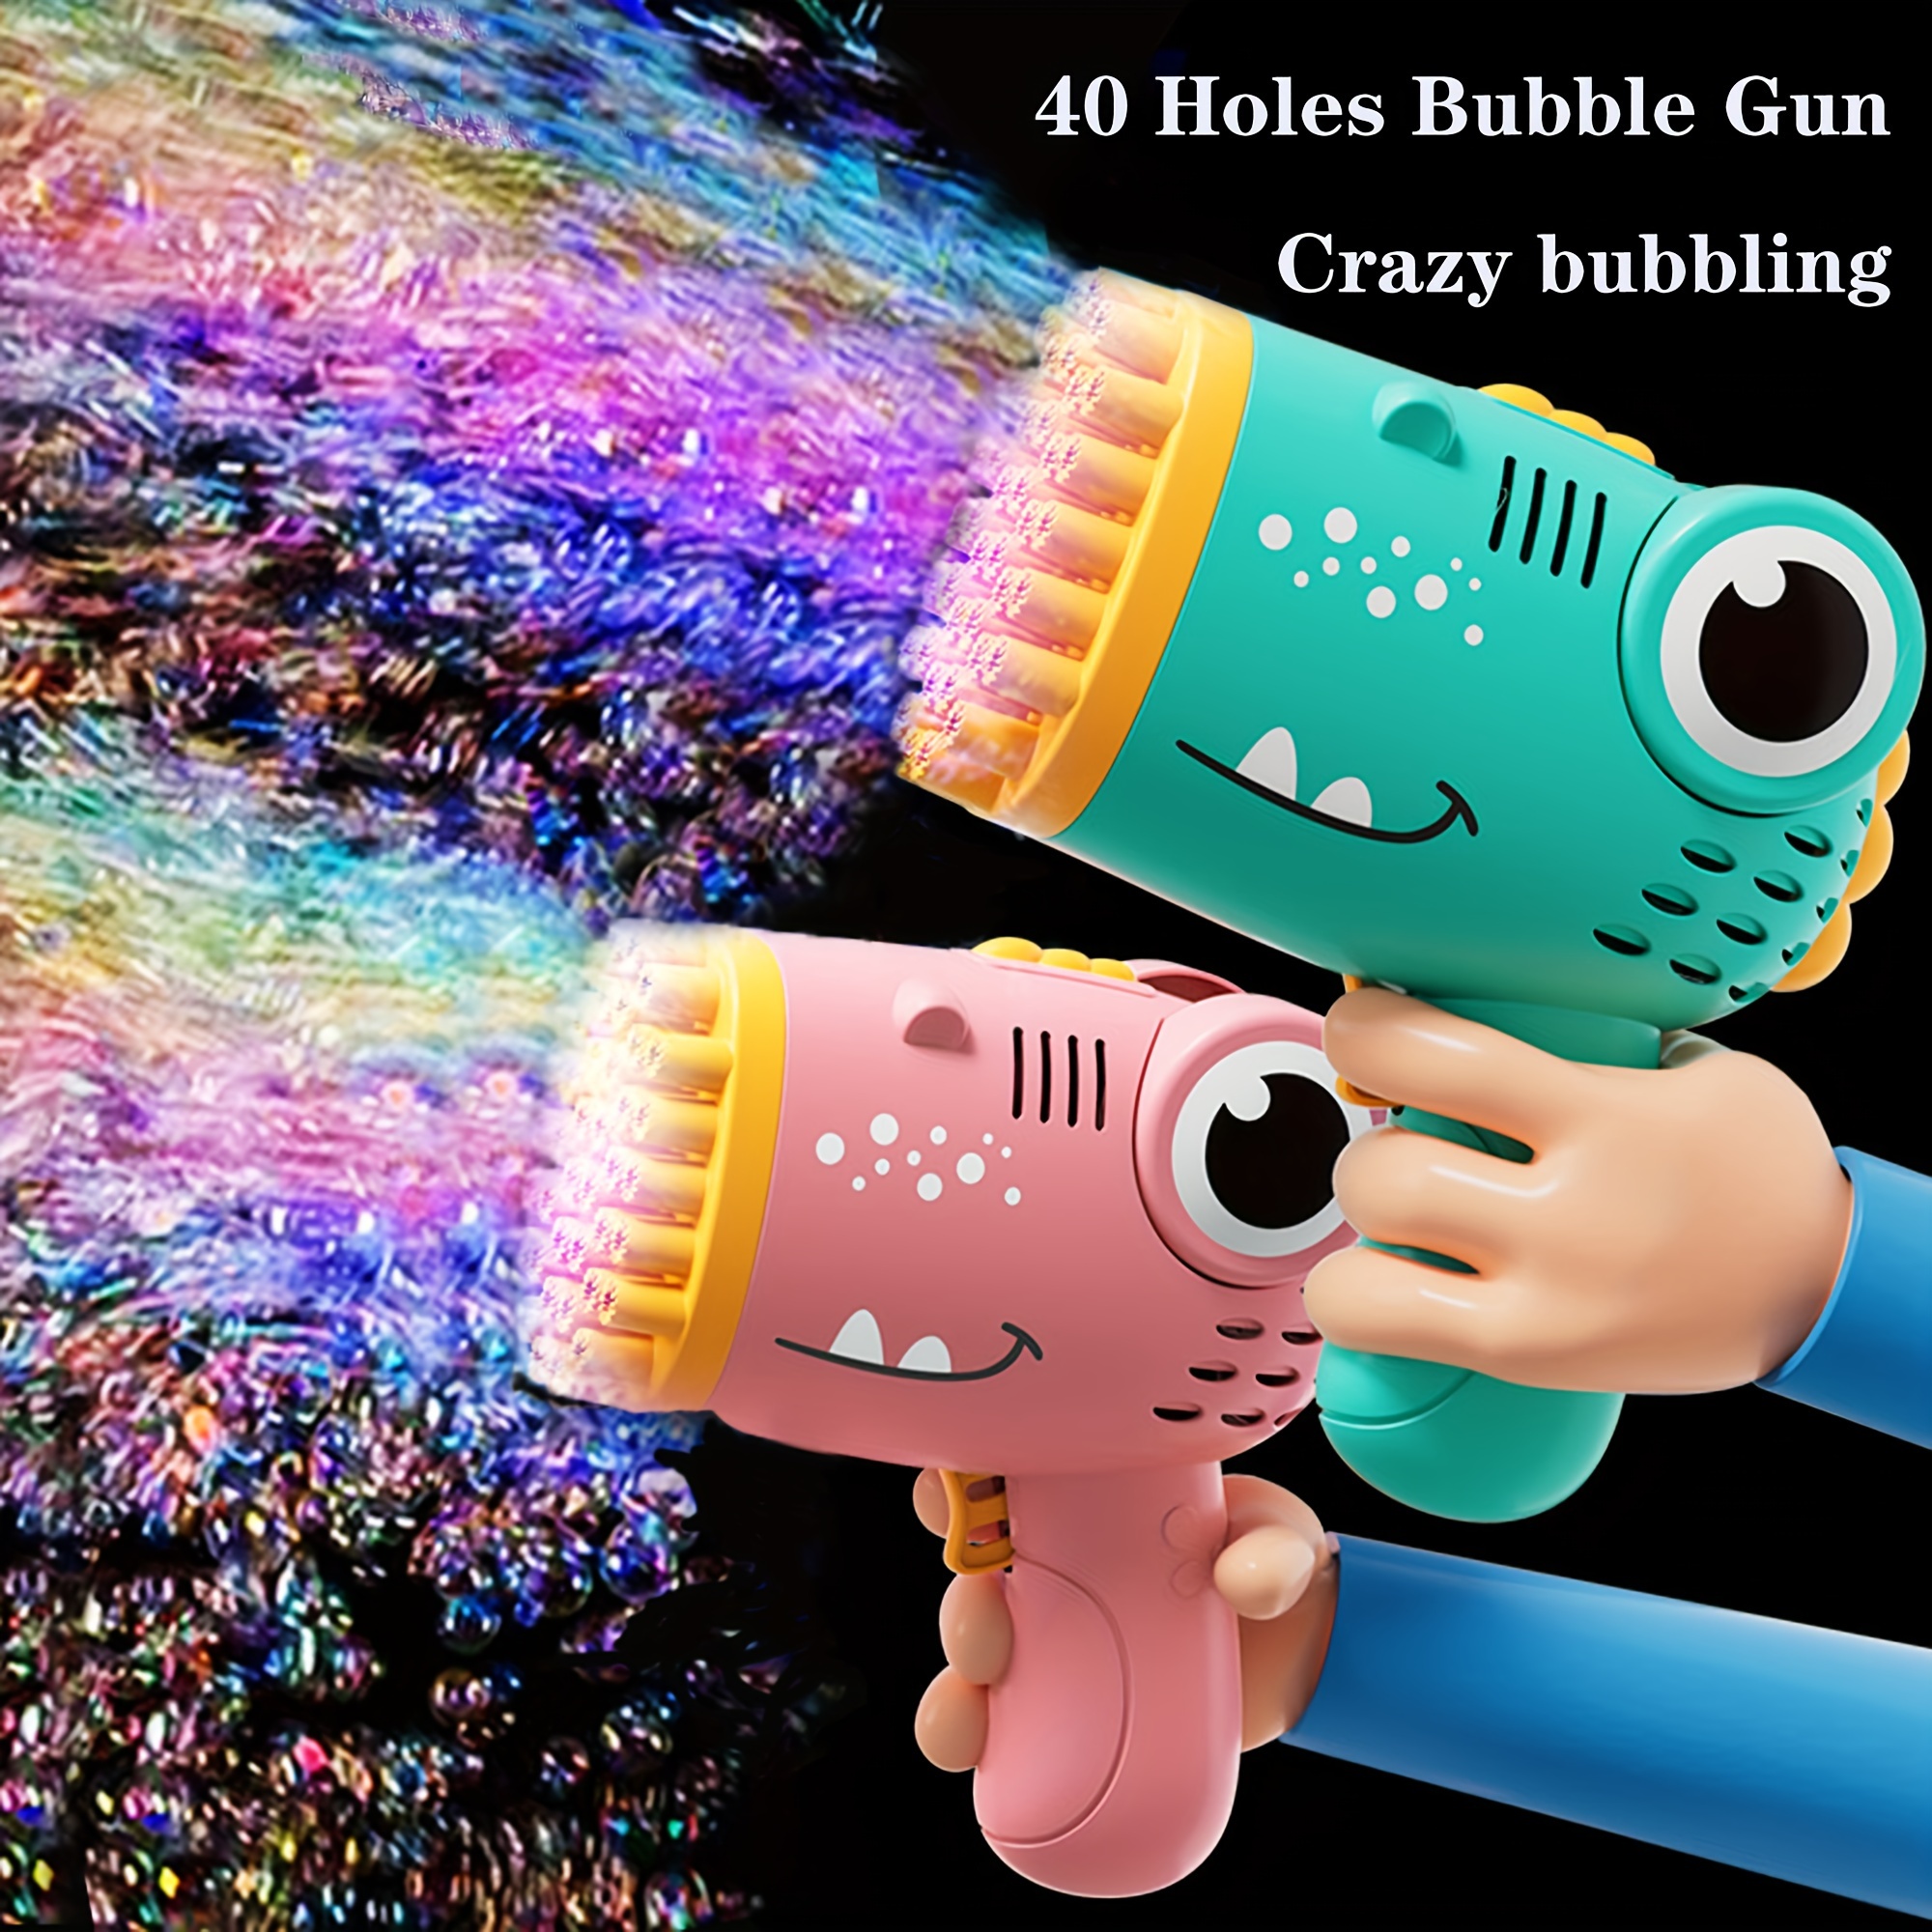 

40 Holes Bubble Gun Electric Automatic Blowing Bubble Rocket Cannon Bubble Machine, Portable Outdoor Party Led Toy (bubble Liquid And Battery Not Included) Christmas Halloween Birthday Gift